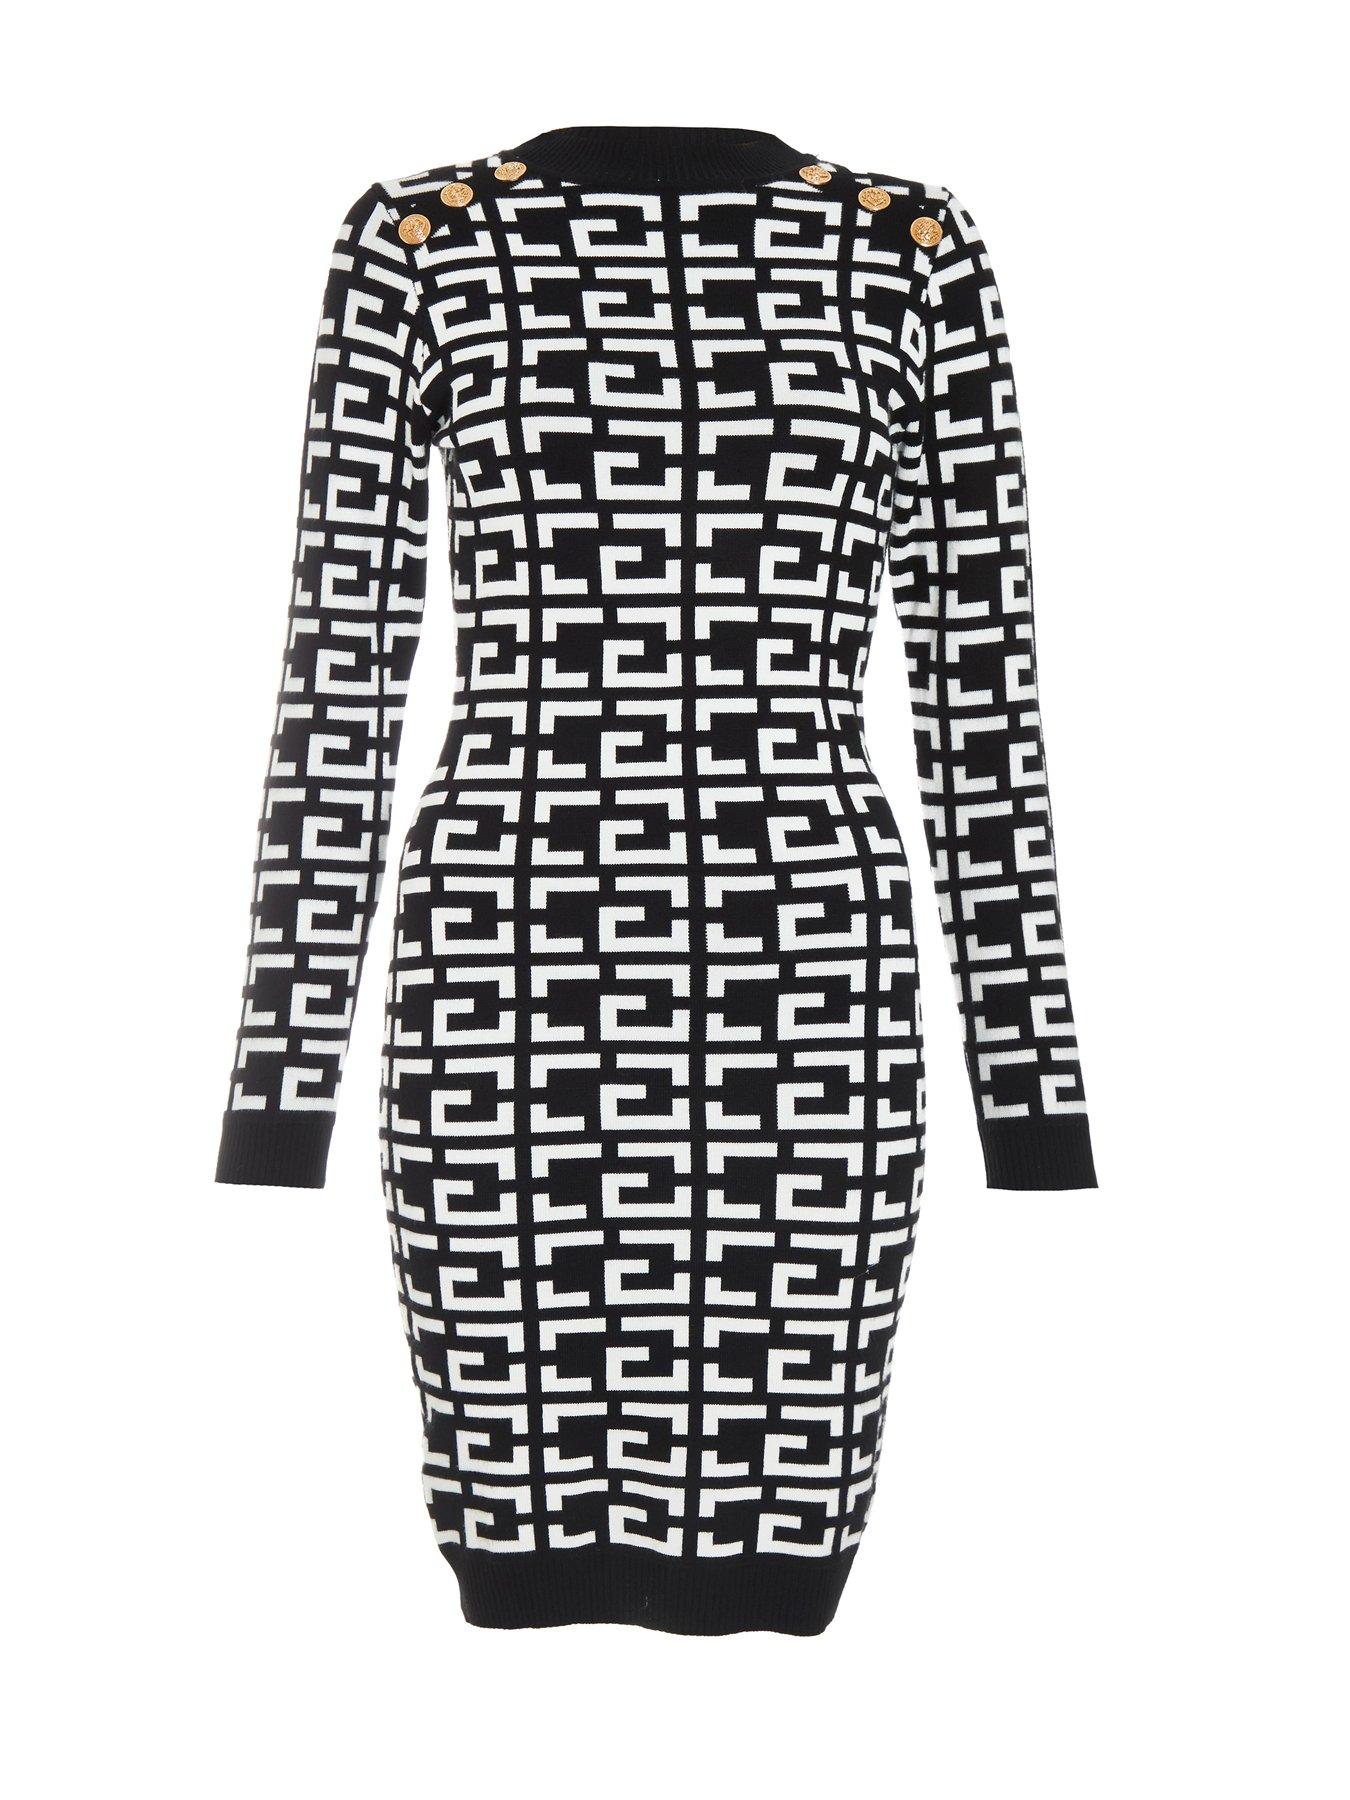 Luxe Woven Bold Houndstooth Sheath Dress